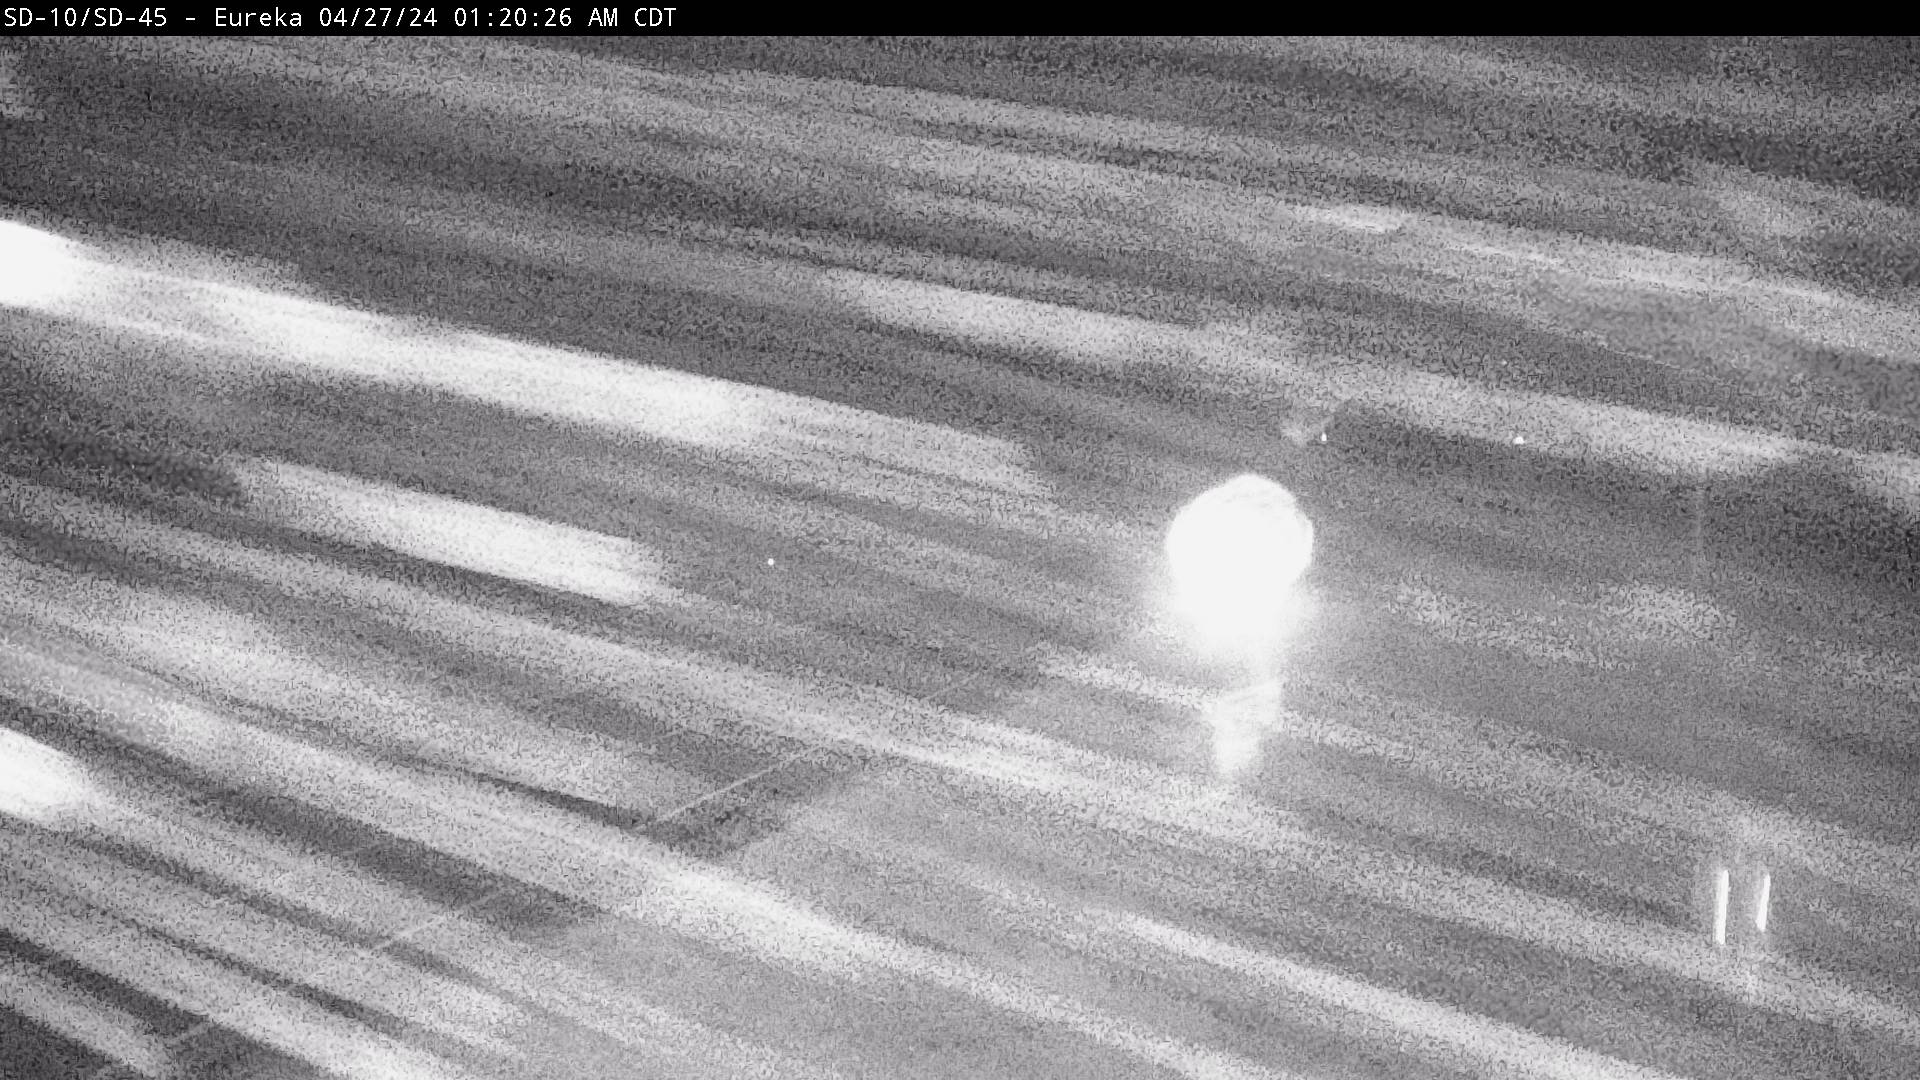 Traffic Cam 13 miles east of town at SD-10 & SD-45 & SD-247 - East Player